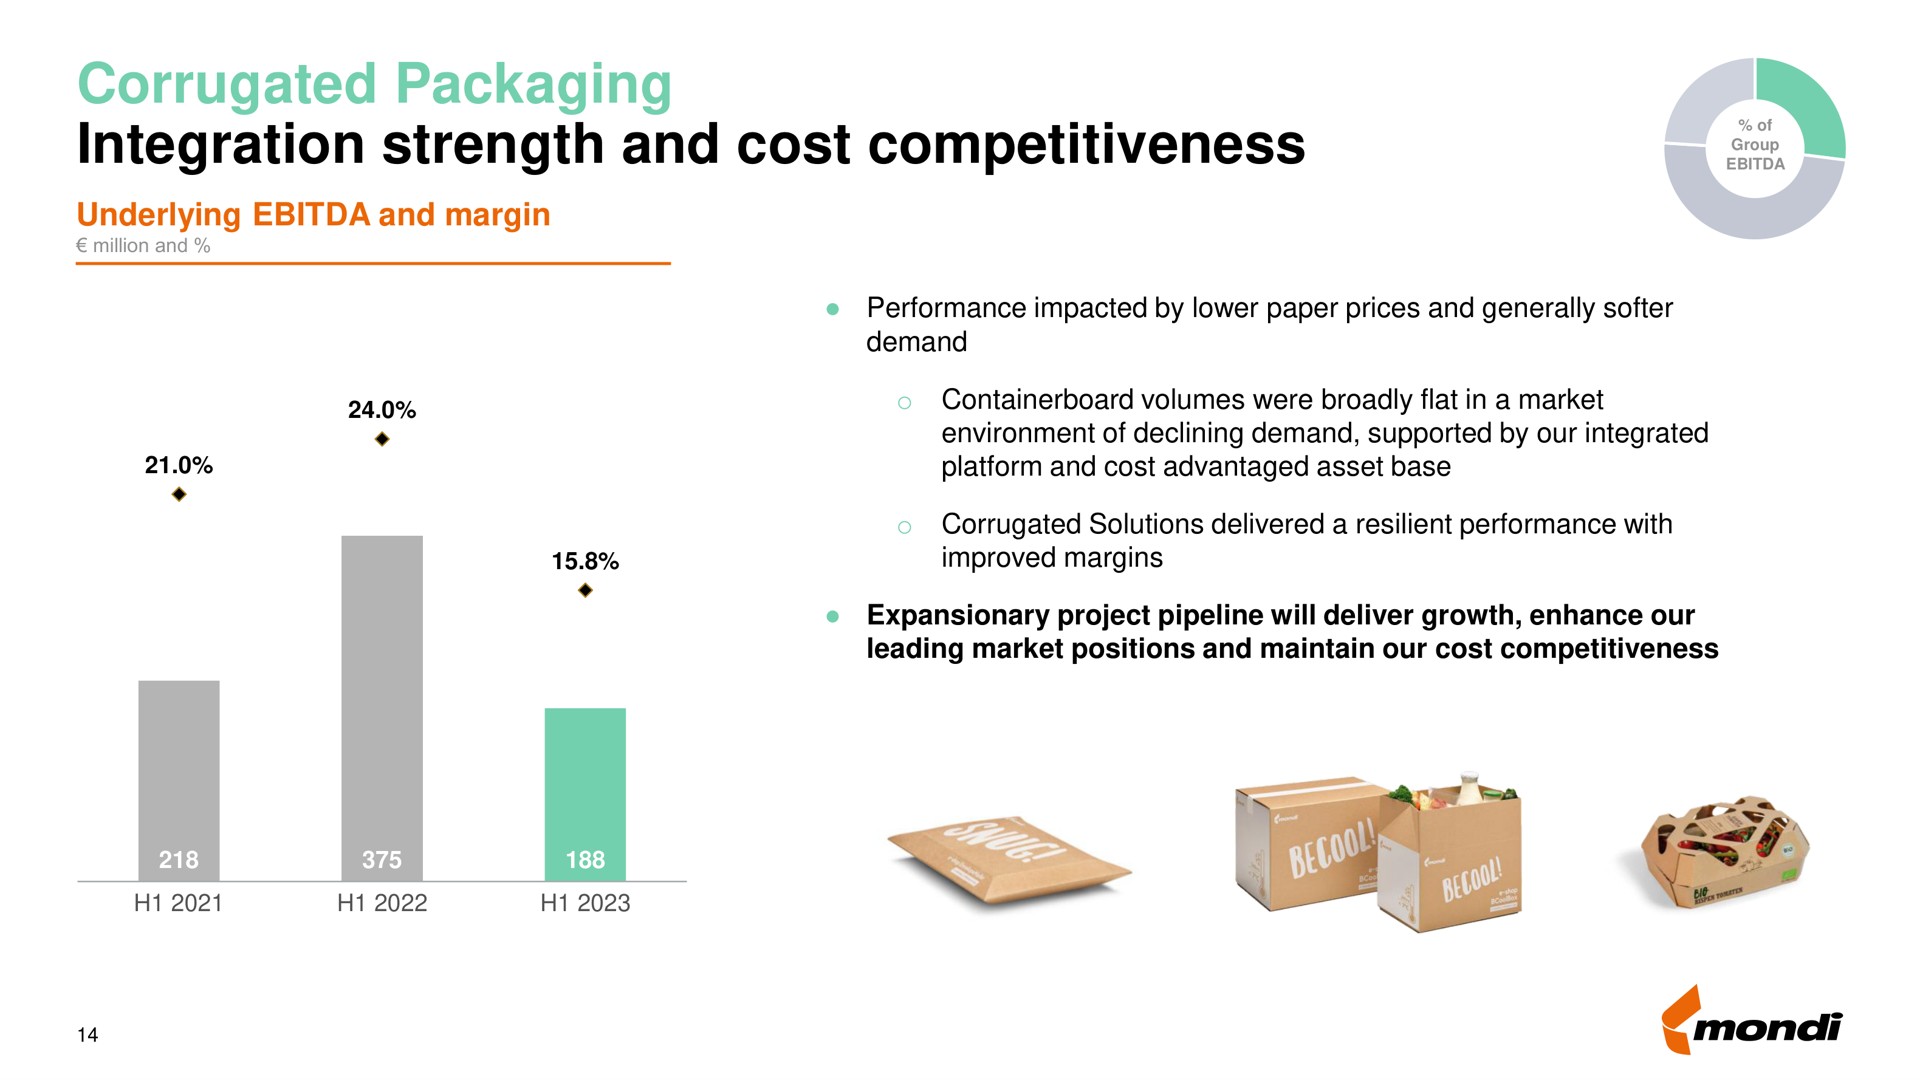 corrugated packaging integration strength and cost competitiveness soe | Mondi